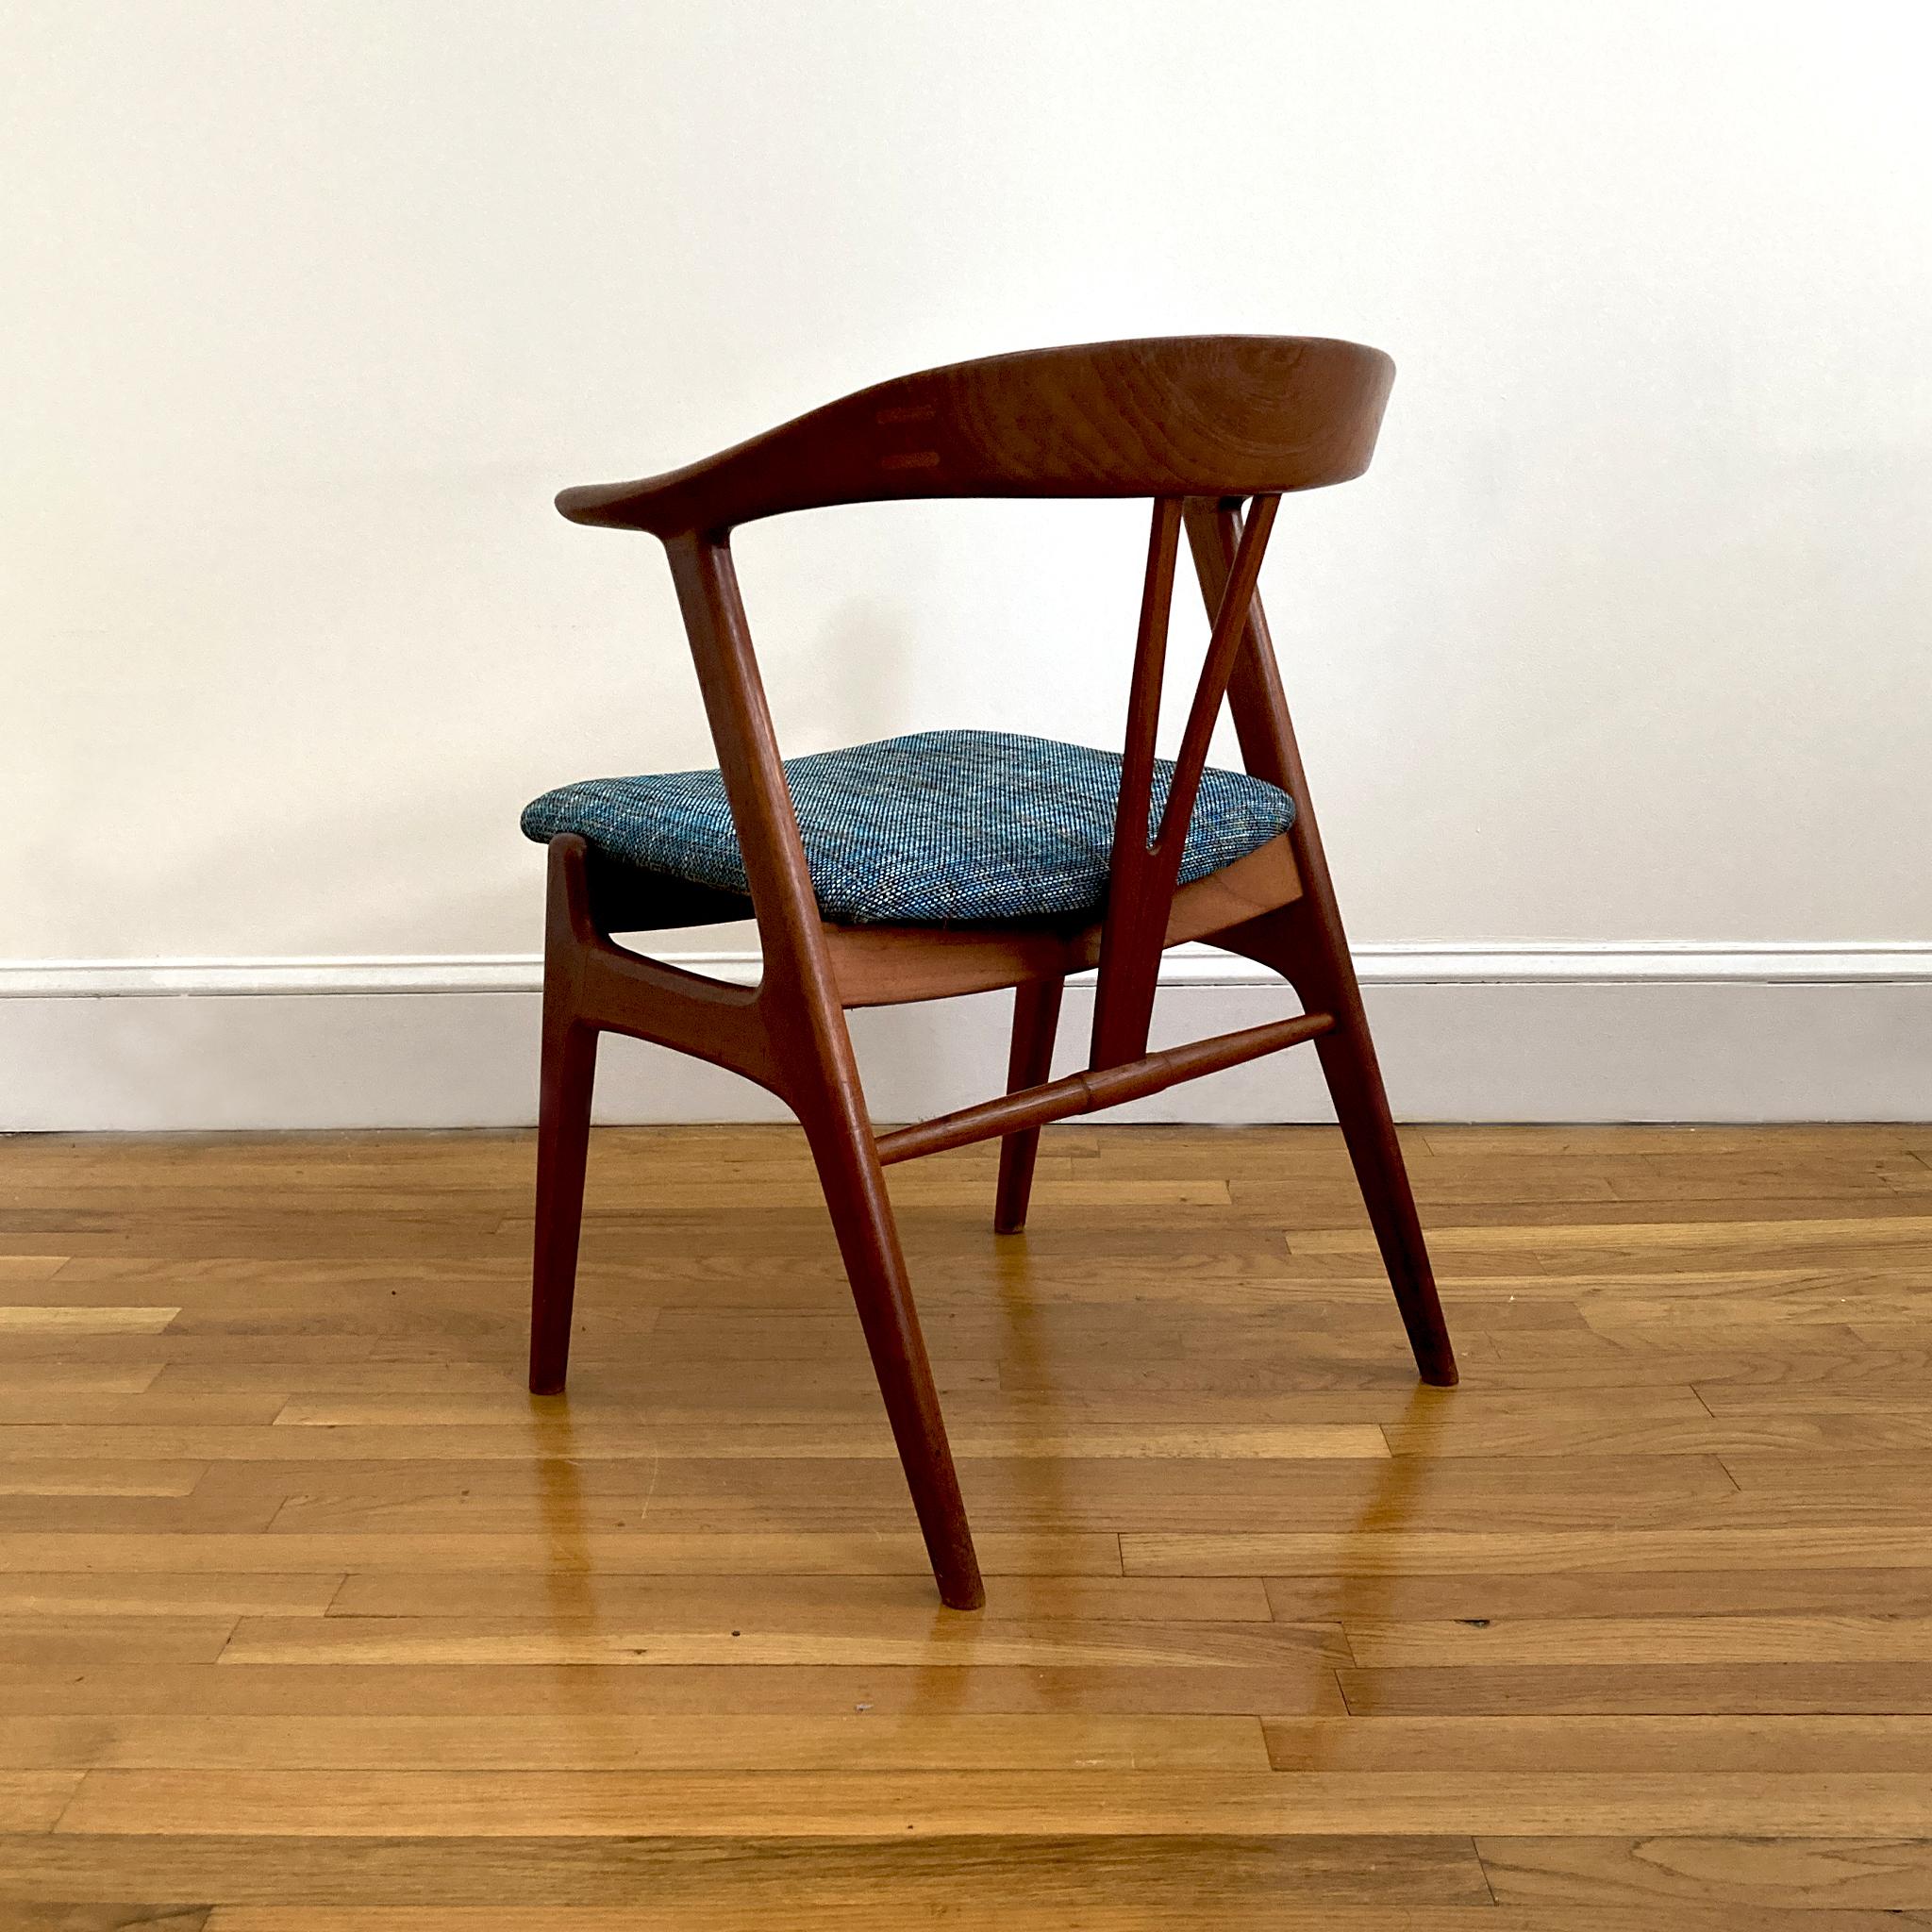 Torbjørn Afdal Teak Form Chair with Green Teal Upholstery, 1950s In Good Condition For Sale In New York, NY